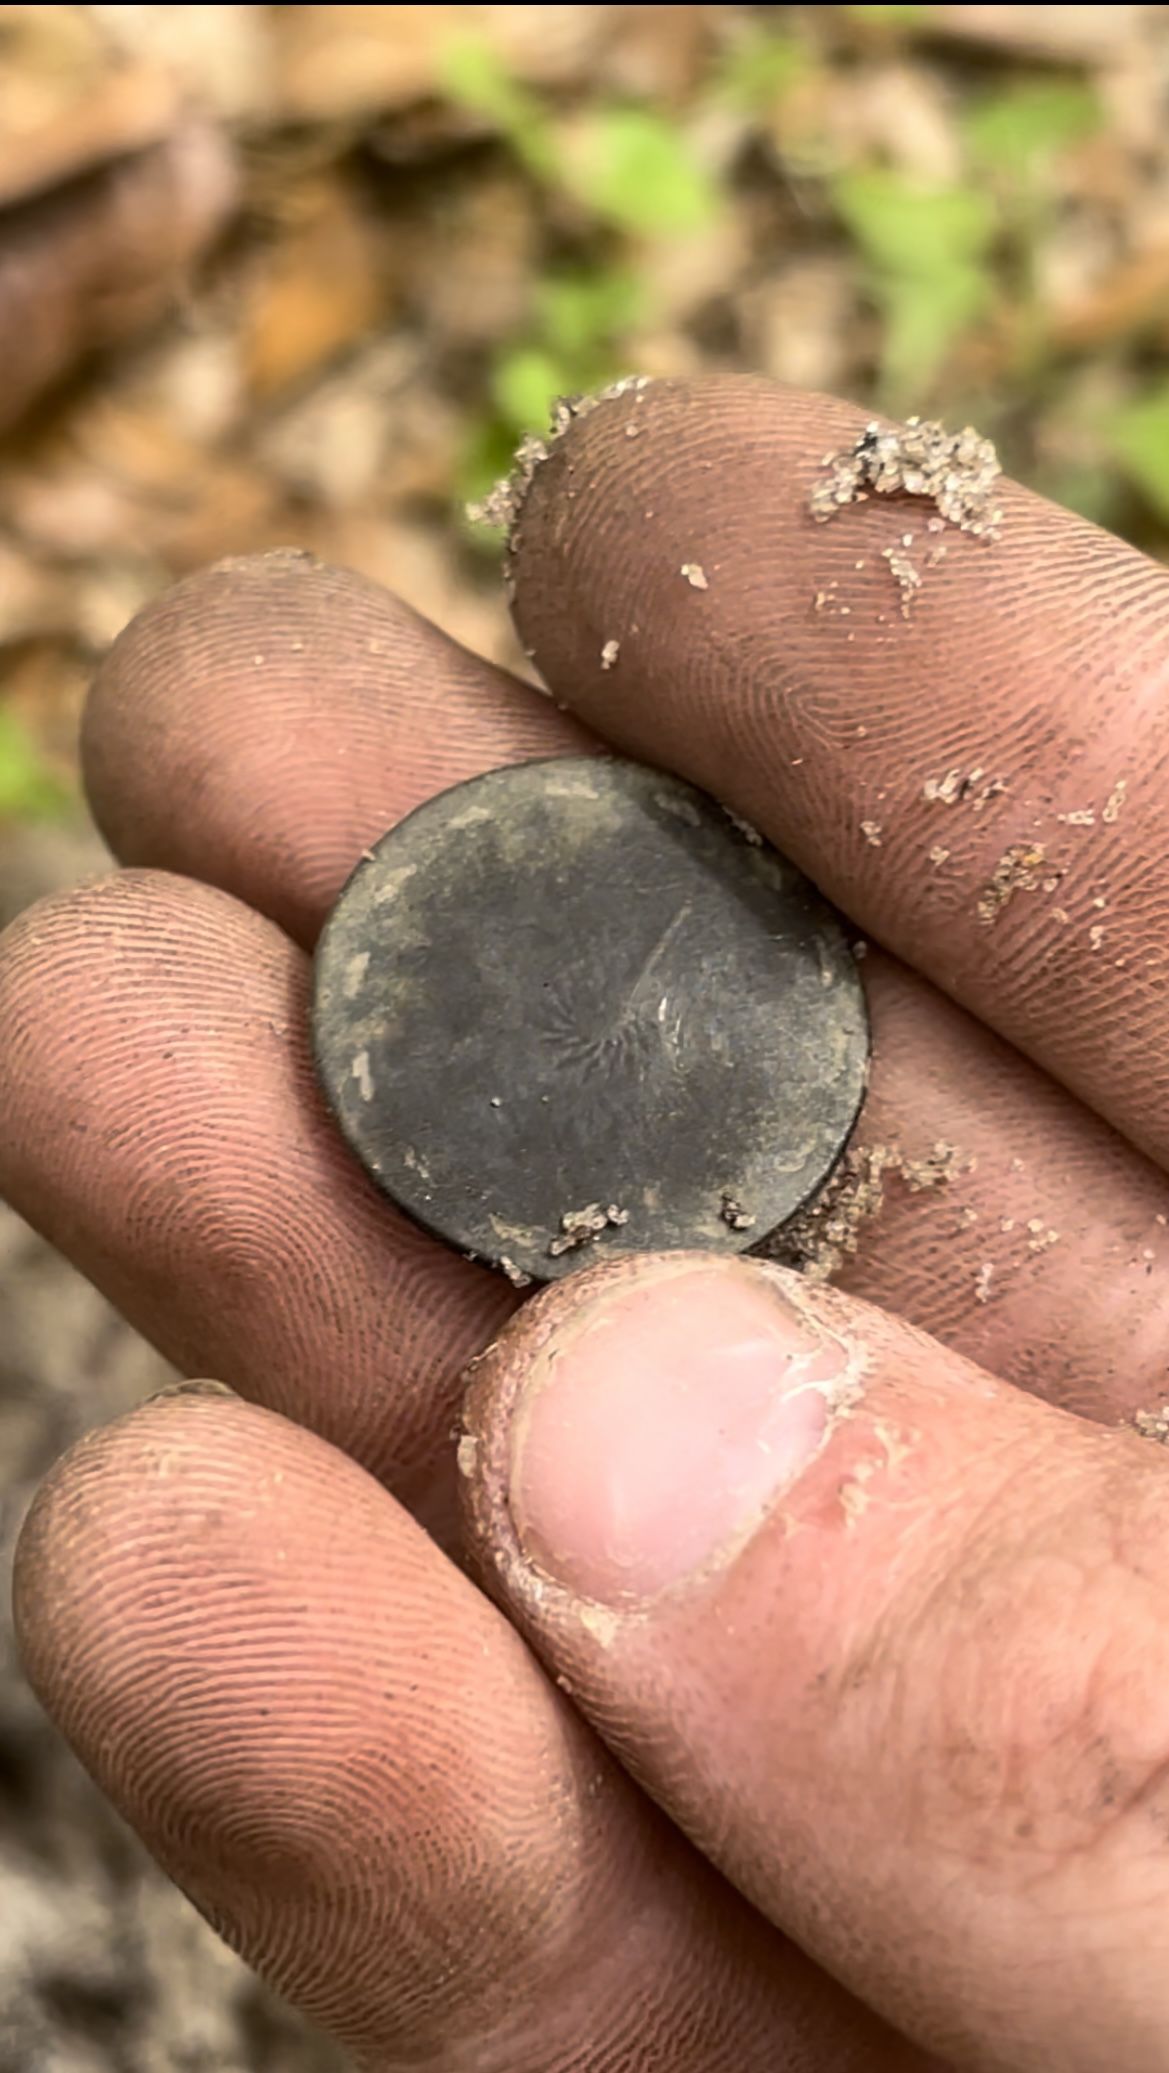 1820s tombac button found in north Florida